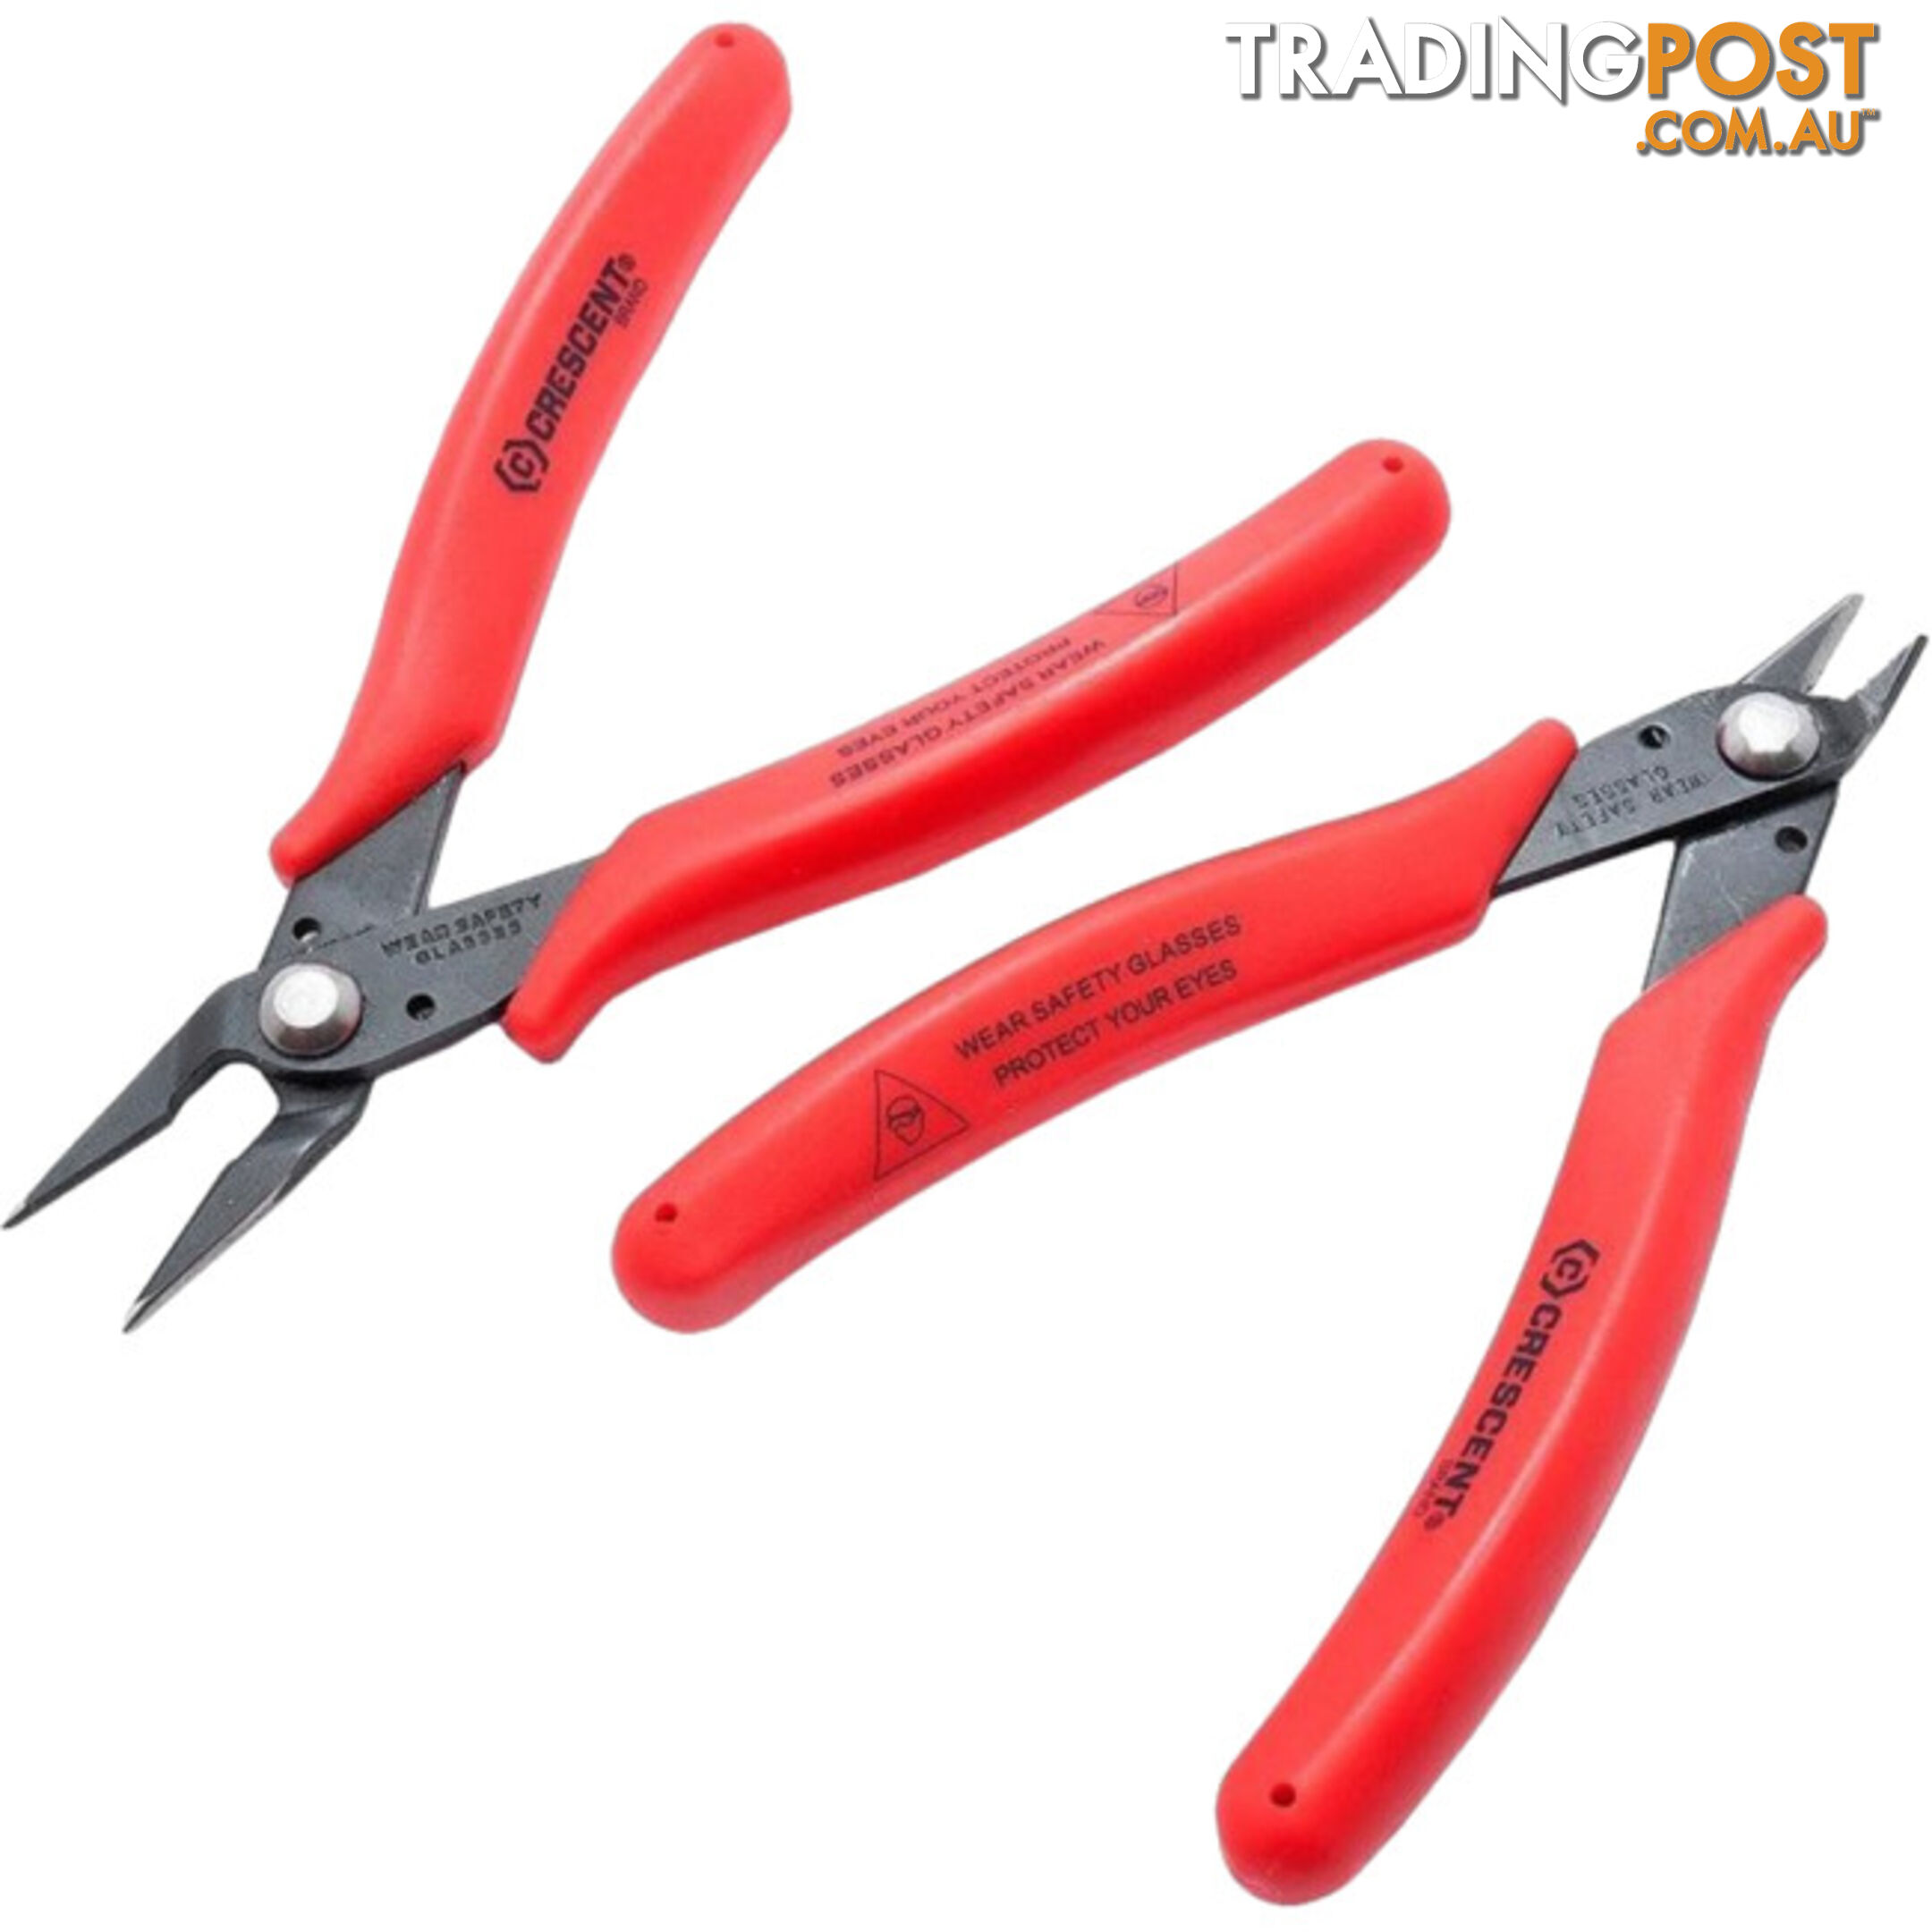 S2KS5N MICRO PLIER AND CUTTER SET 2 PIECE SET